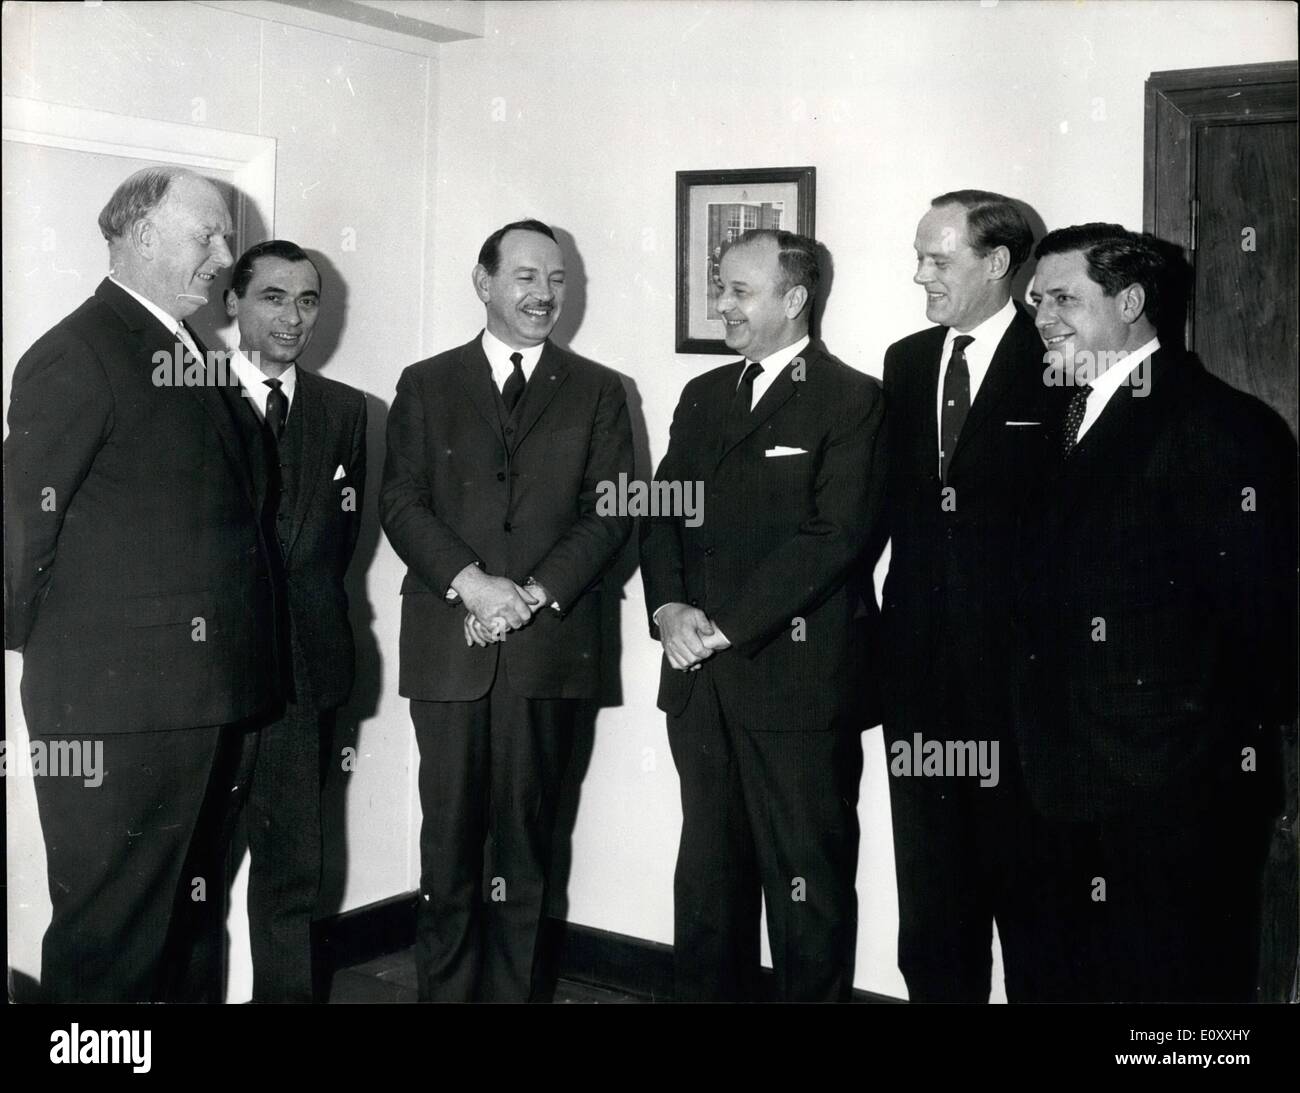 Jan. 01, 1968 - Discussing U.S. Visit: At Horseferry Hanues in London, Sir Eric St. Johnston, H.M. Chief Inspector of Constabulary, and Mr. John Minnich, Legal Attache at the U.S. Embassy, discussed with deputy Chief Constable H.J. Phillips (Hampshire), Assistant Chief Constable P.D. Knights (Birmingham), Deputy Chief Constable R. Gregory (Devon and Cornwall) and Det. Chief Inspector R.C. Stevenson (Metropolitan), arrangements for their forthcoming visits to the United states financed by a grant of 2,000 by the Ford (Dagenham) Trust Stock Photo